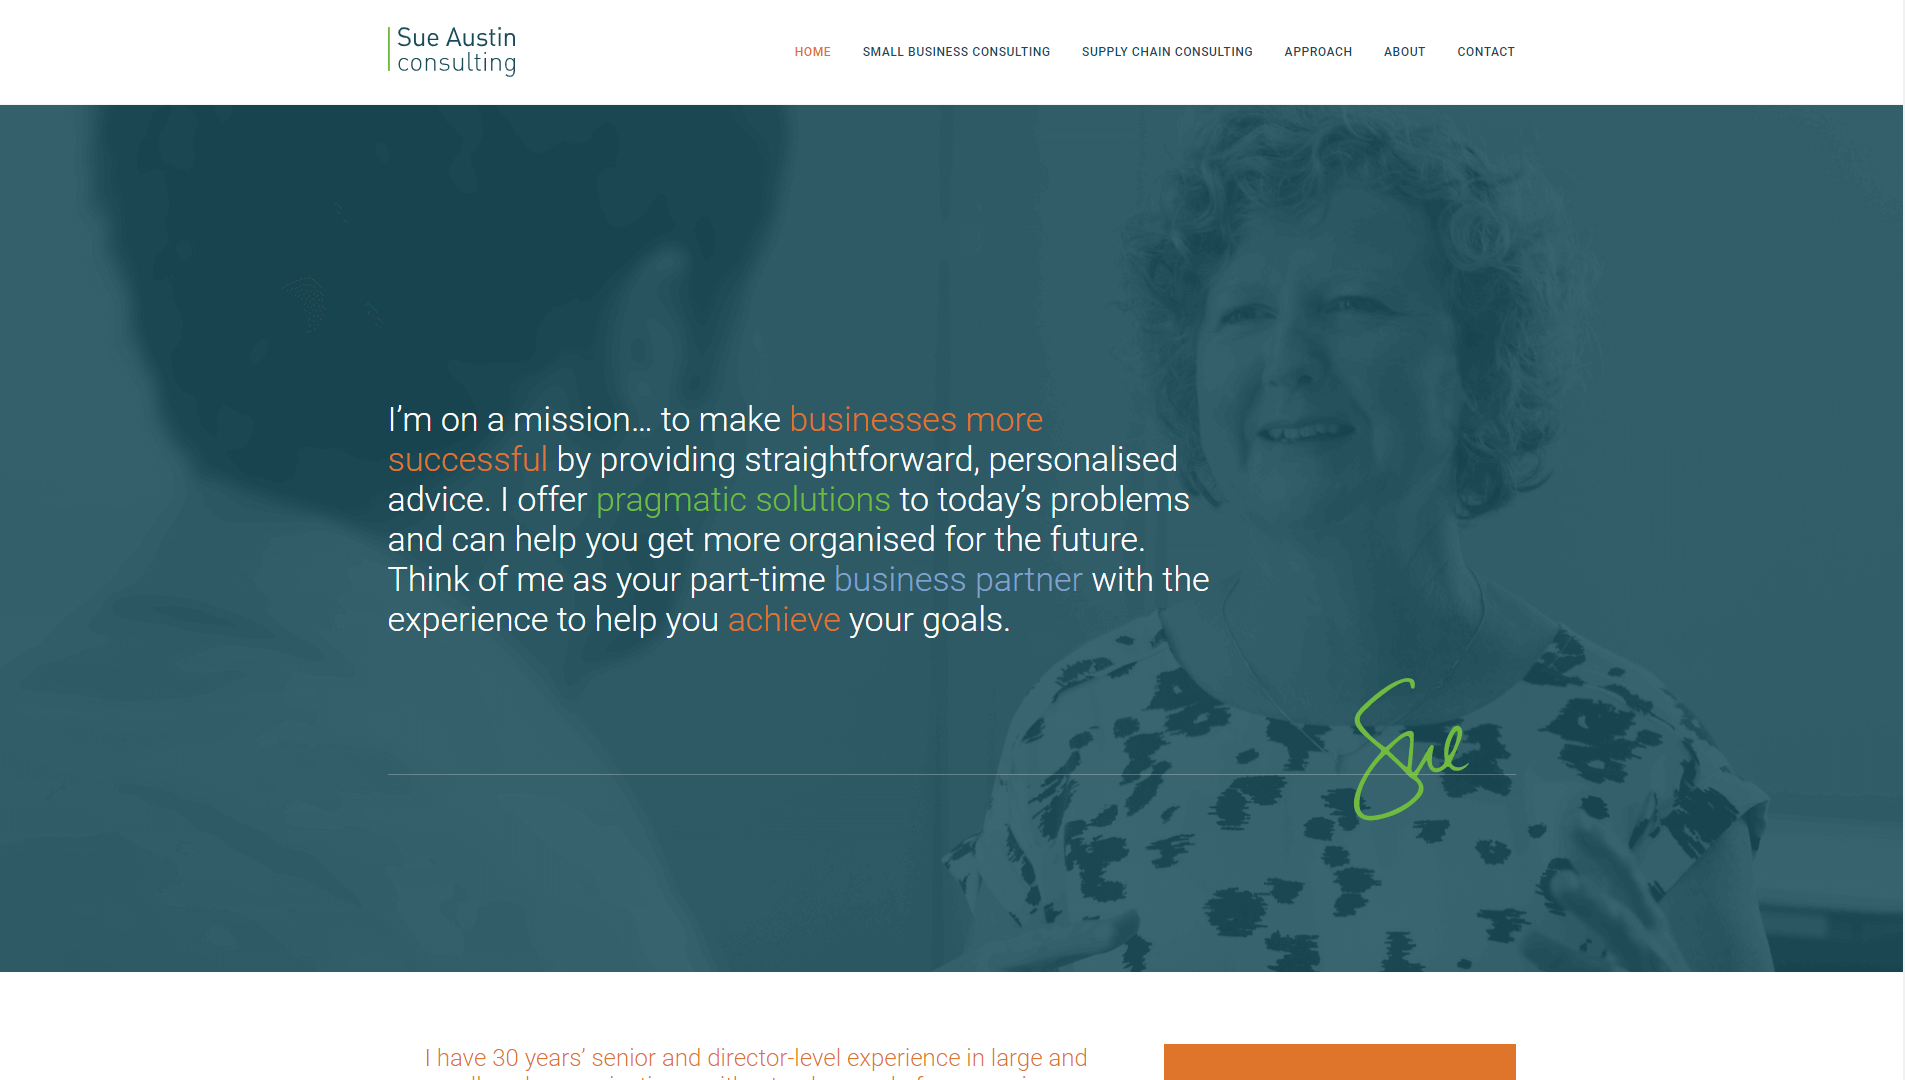 An example of a service website.